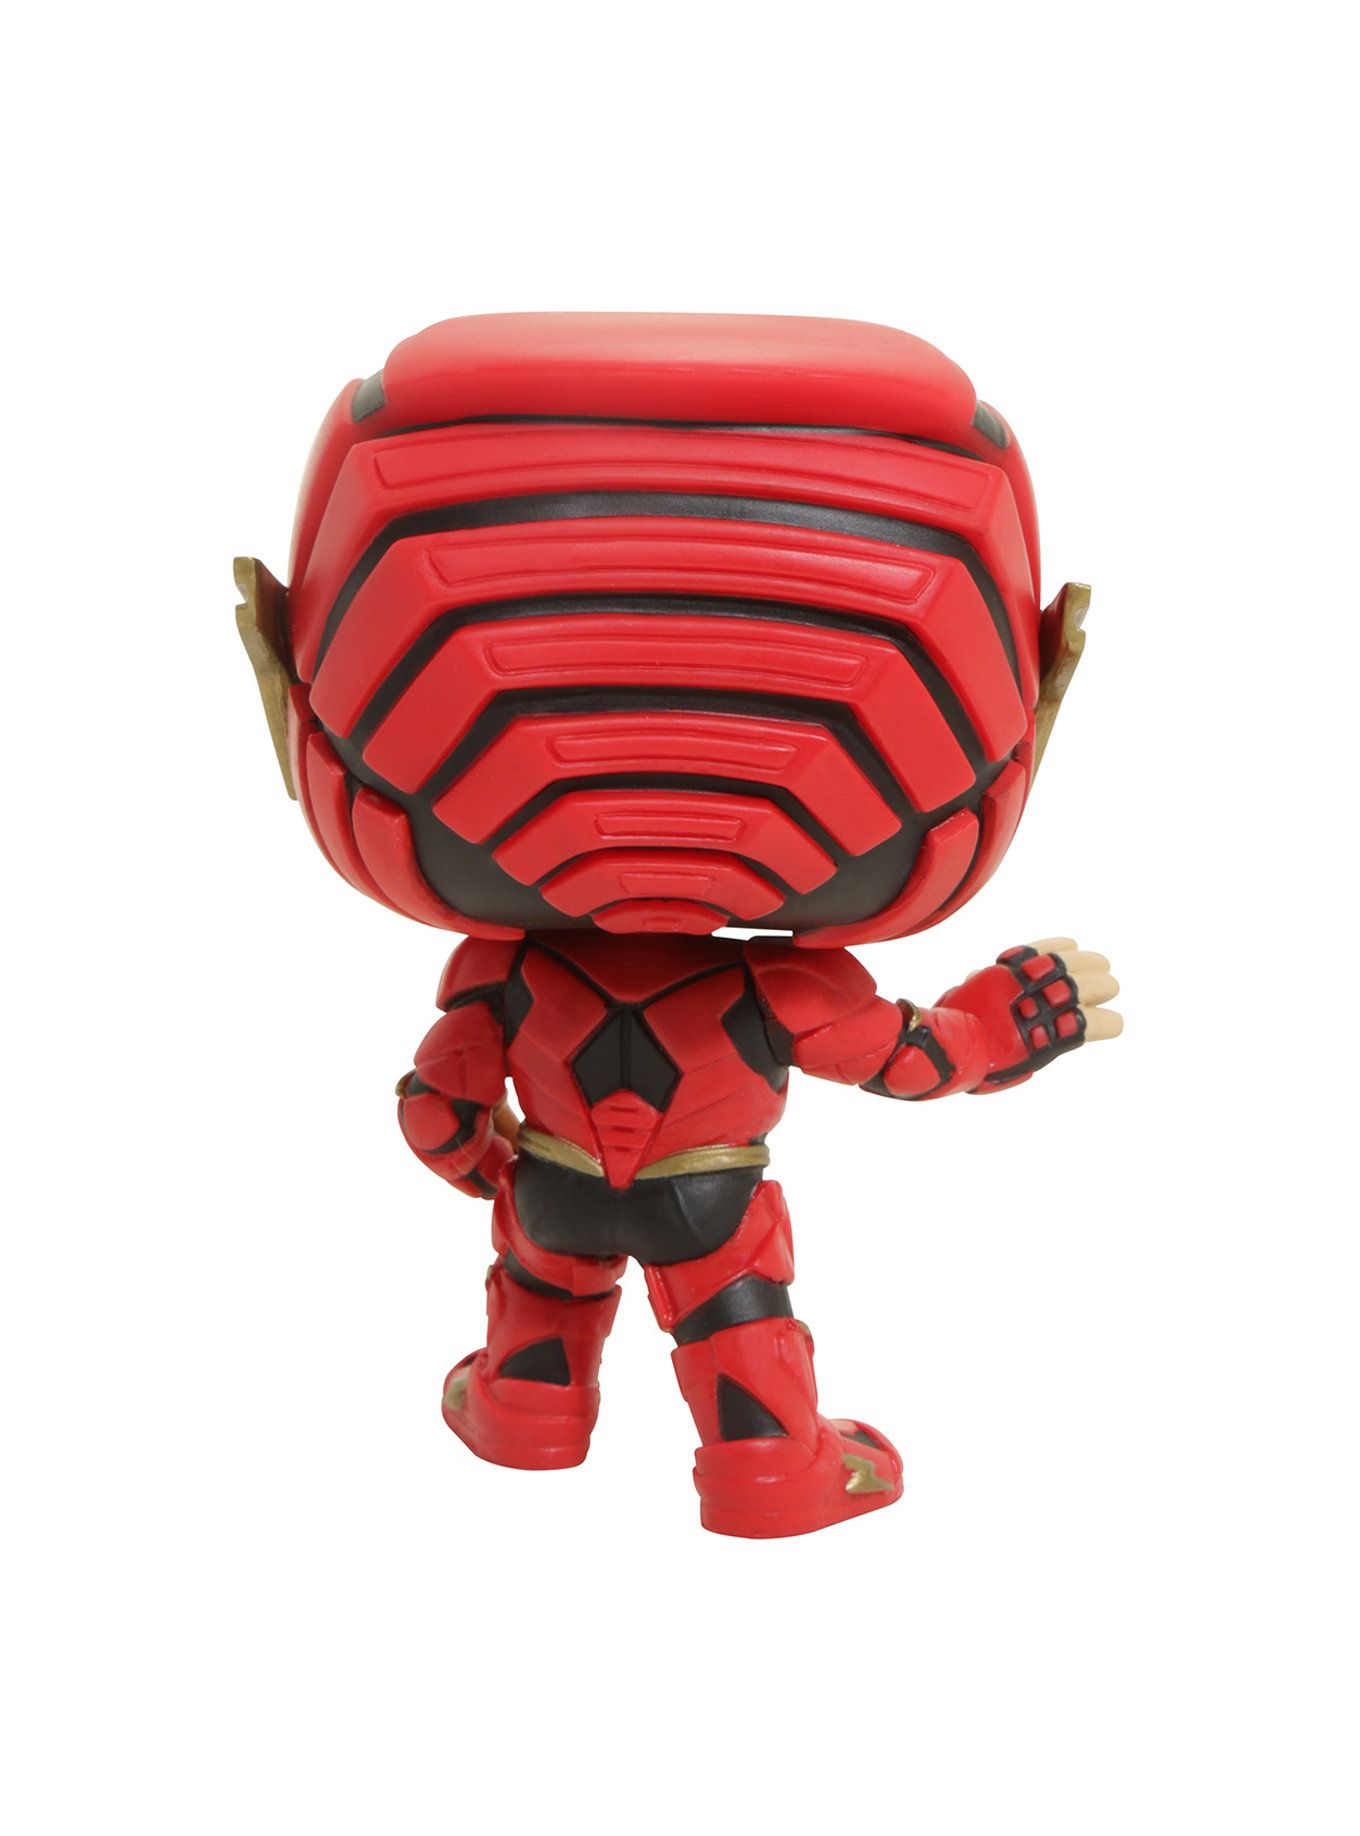 The Flash #208 - Justice League - Funko Pop! Heroes